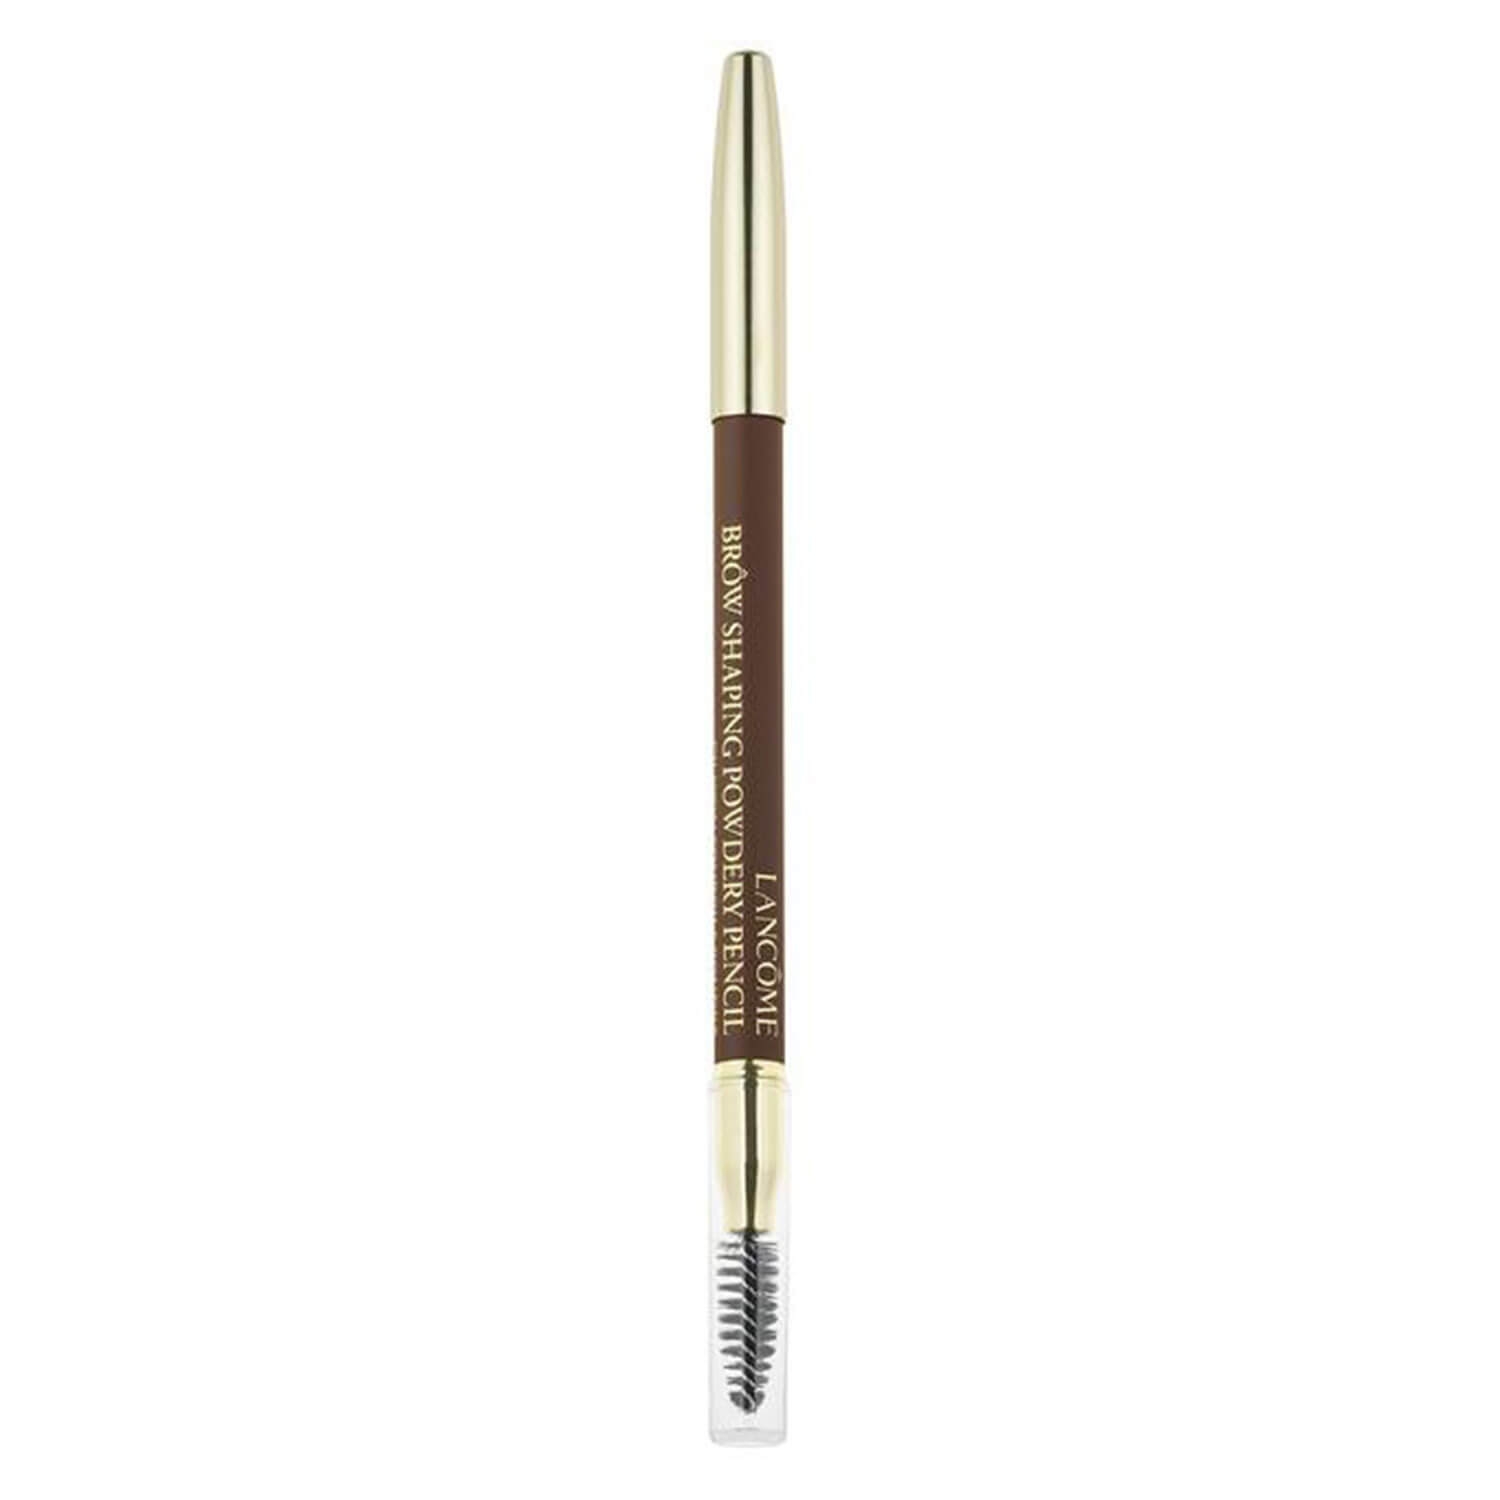 Product image from Lancôme Brows - Brow Shaping Powdery Pencil 05